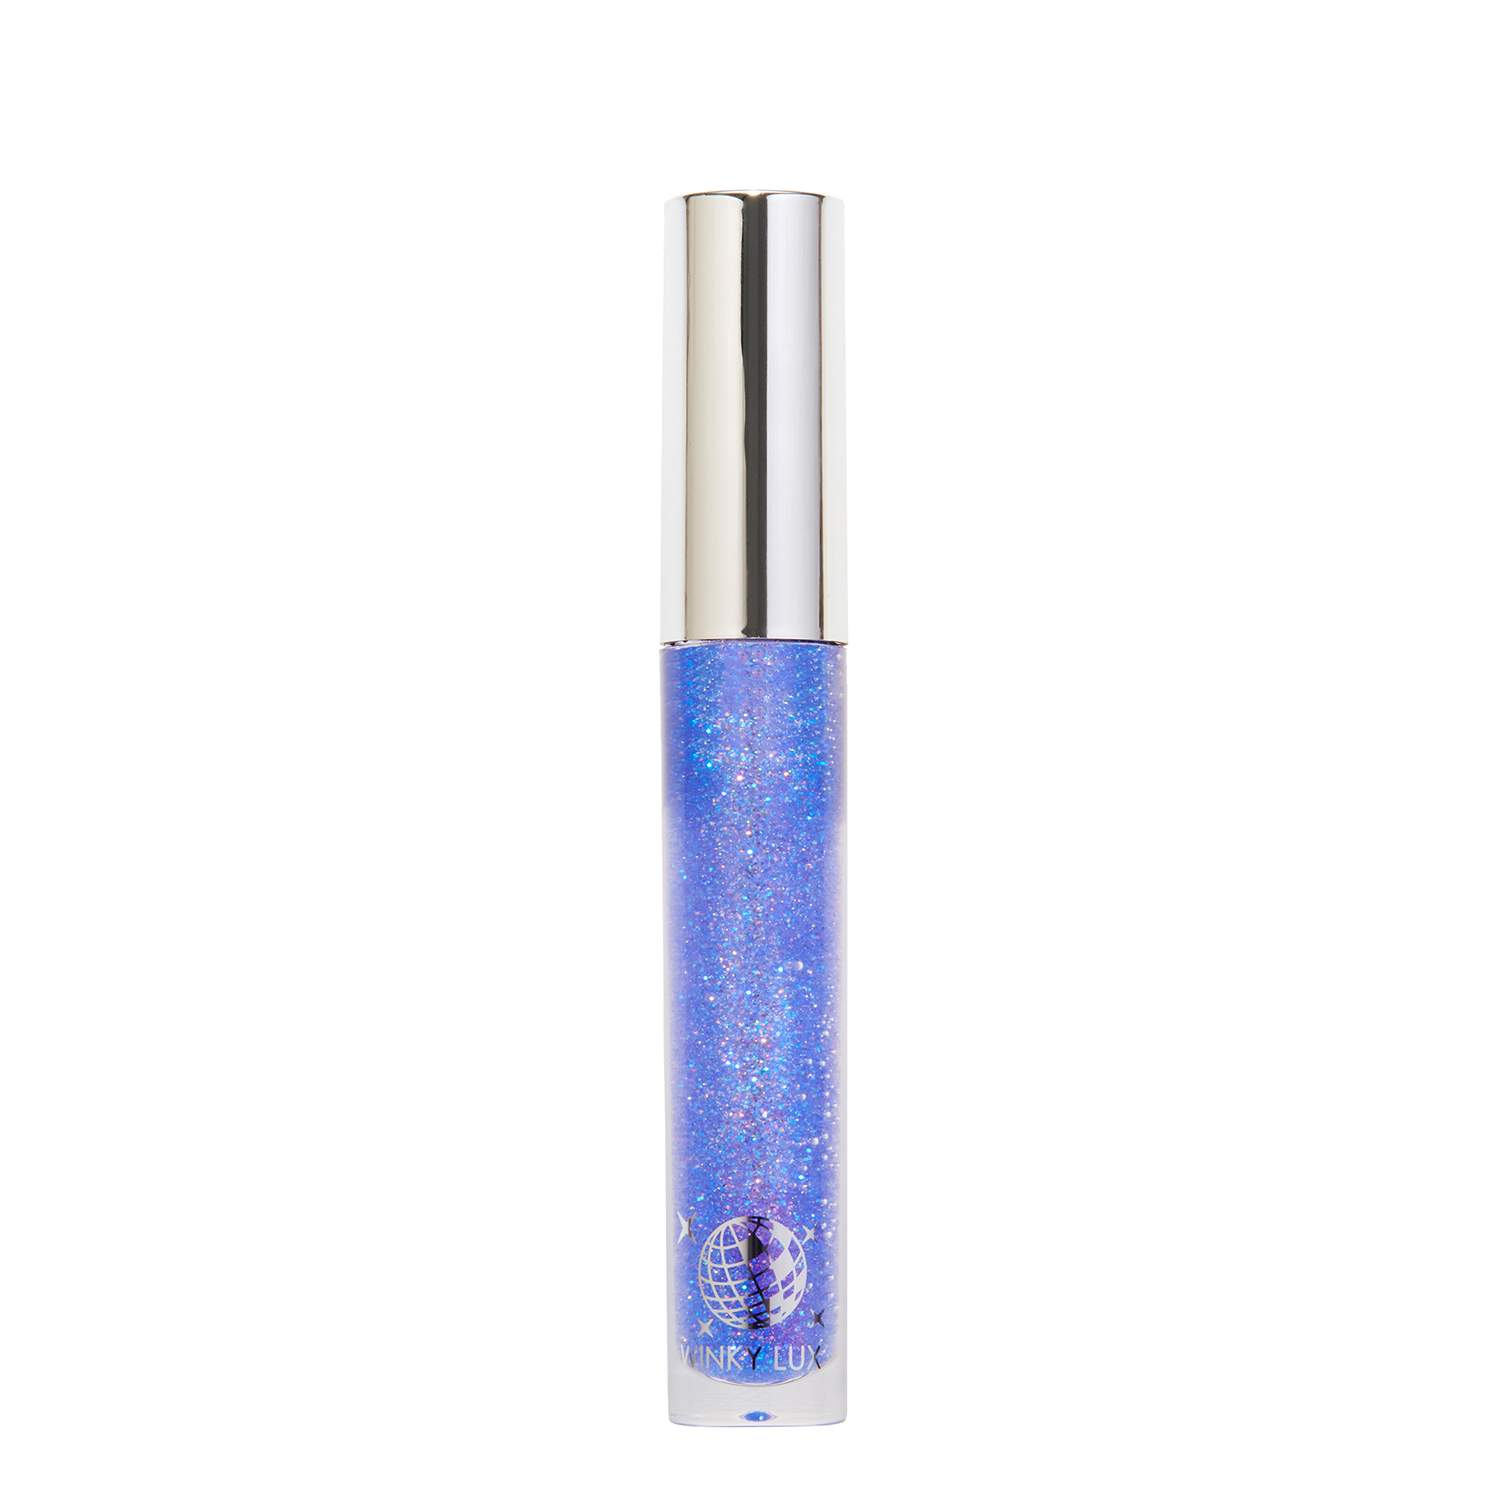 Disco Gloss Winky Lux Disco Gloss - Far Out 1